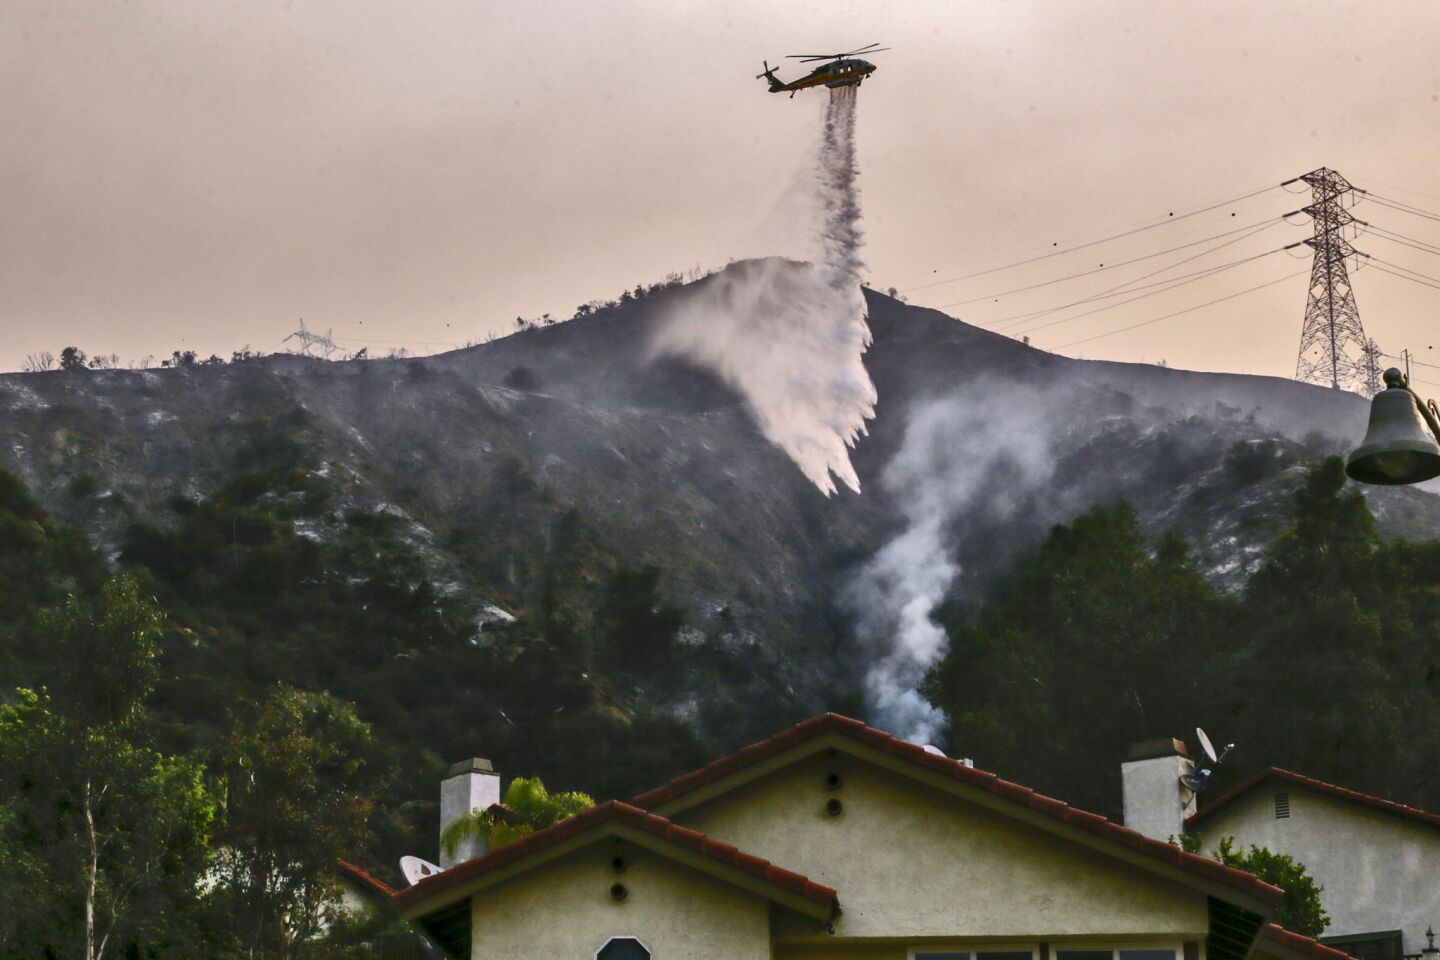 An LA County firefighting helicopter makes a water drop above Westvale Road as Fish fire burns in Duarte on Tuesday morning.